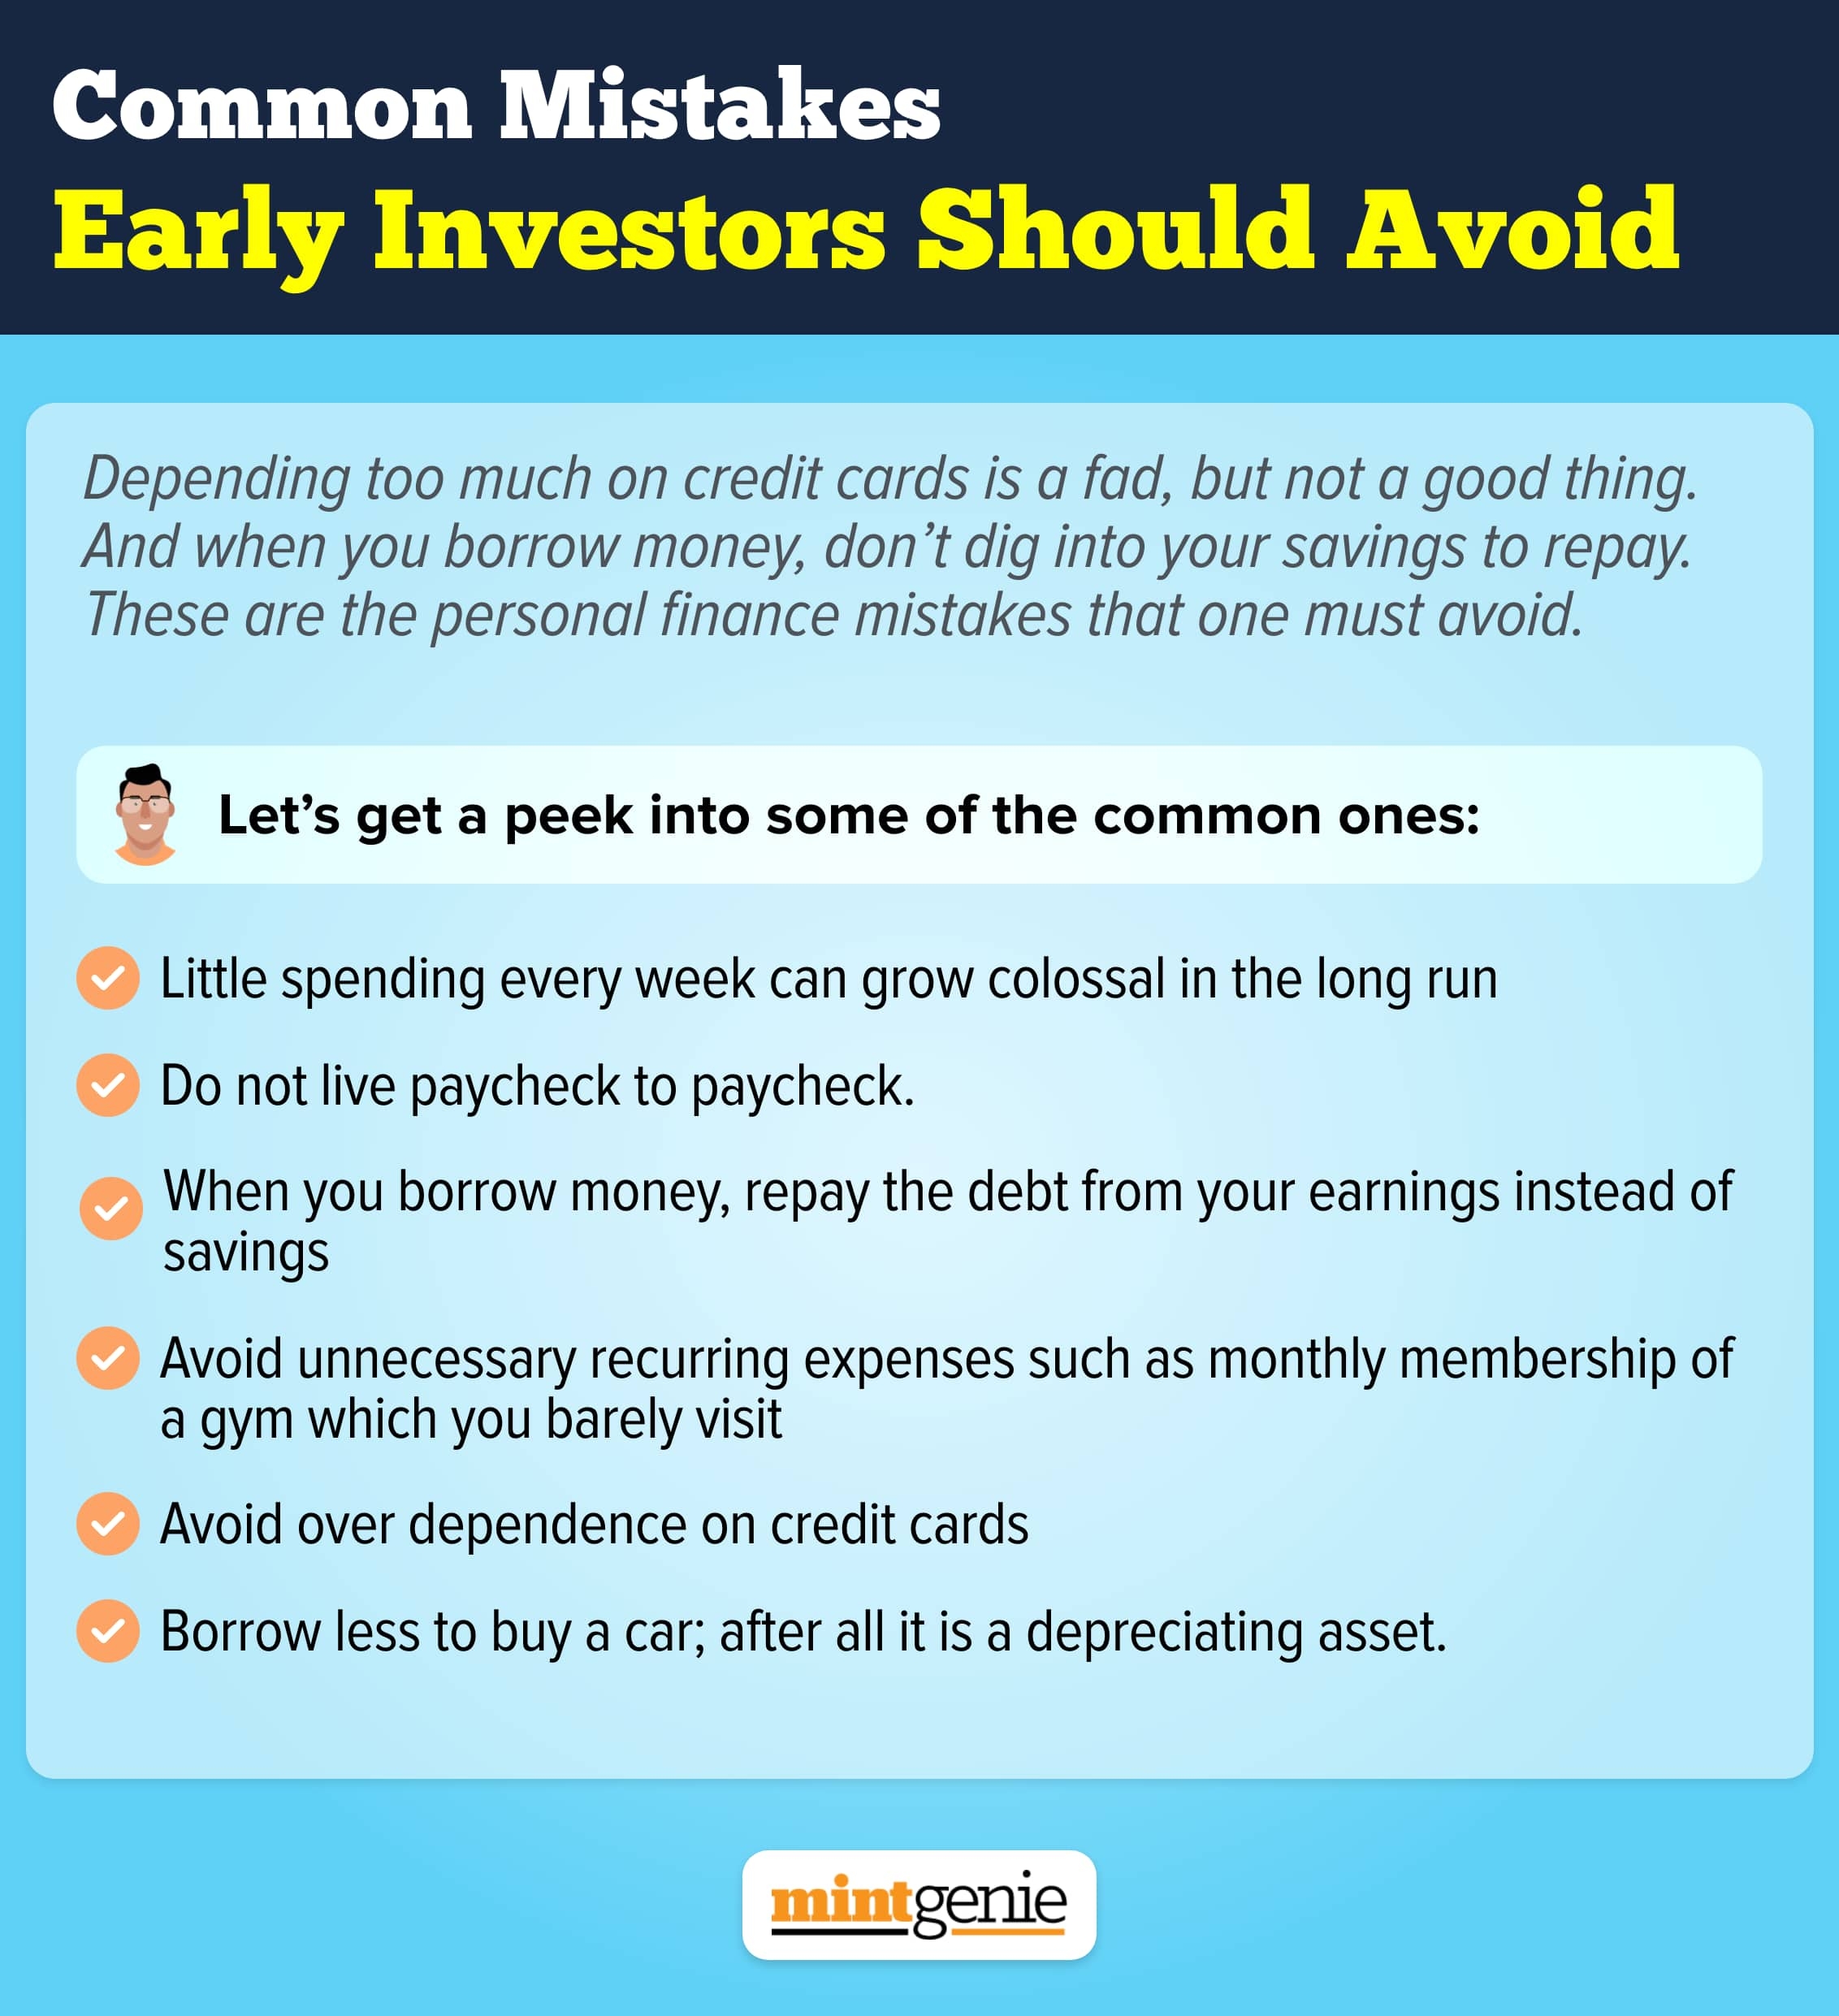 Common mistakes early investors should avoid.&nbsp;